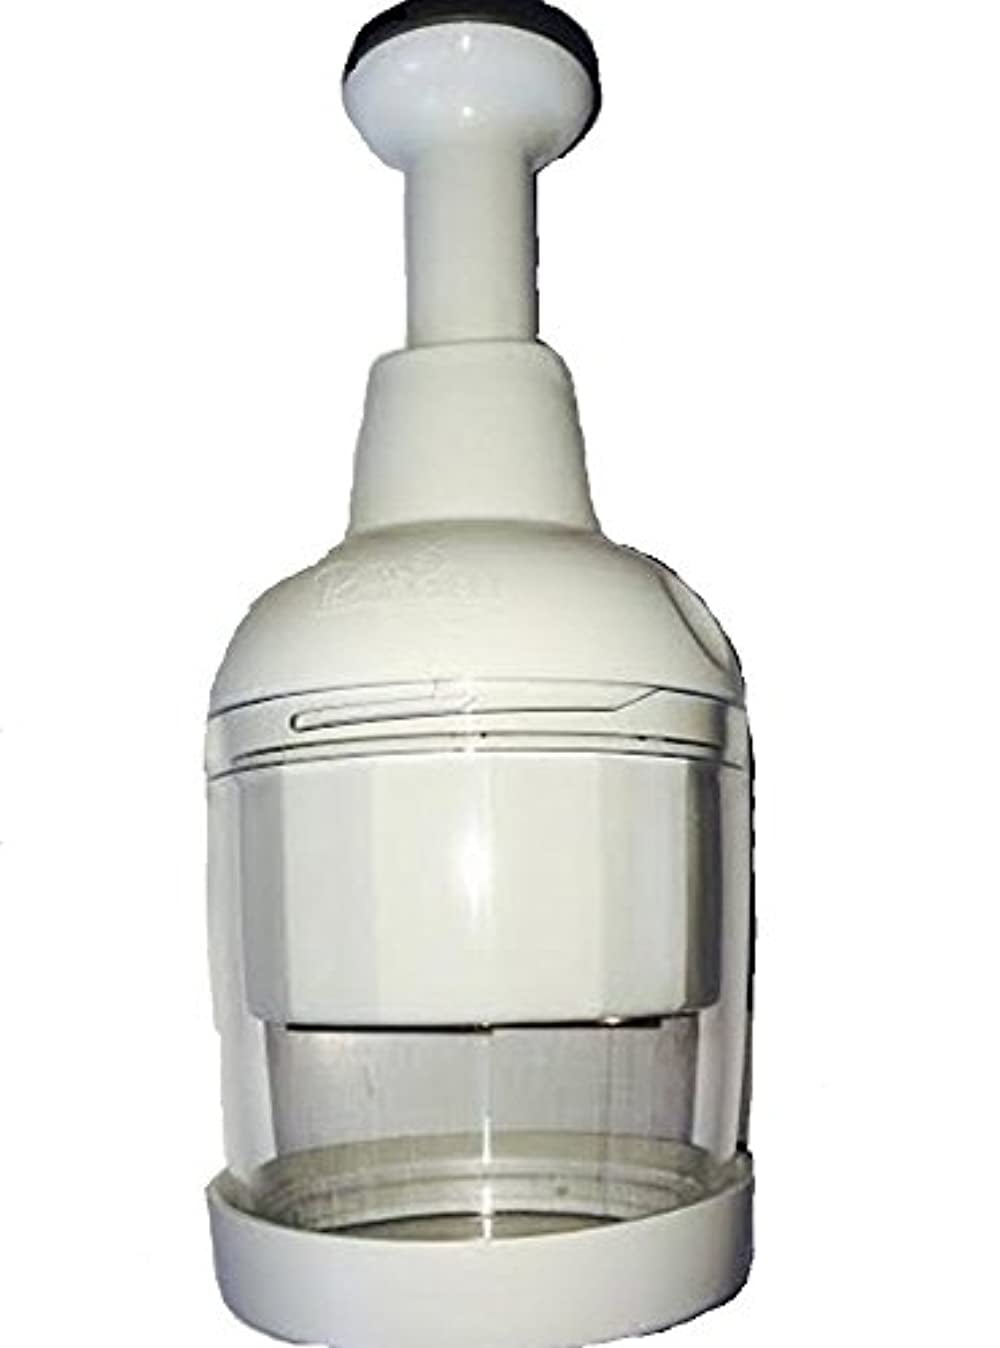 the pampered chef food chopper (#2585)-white